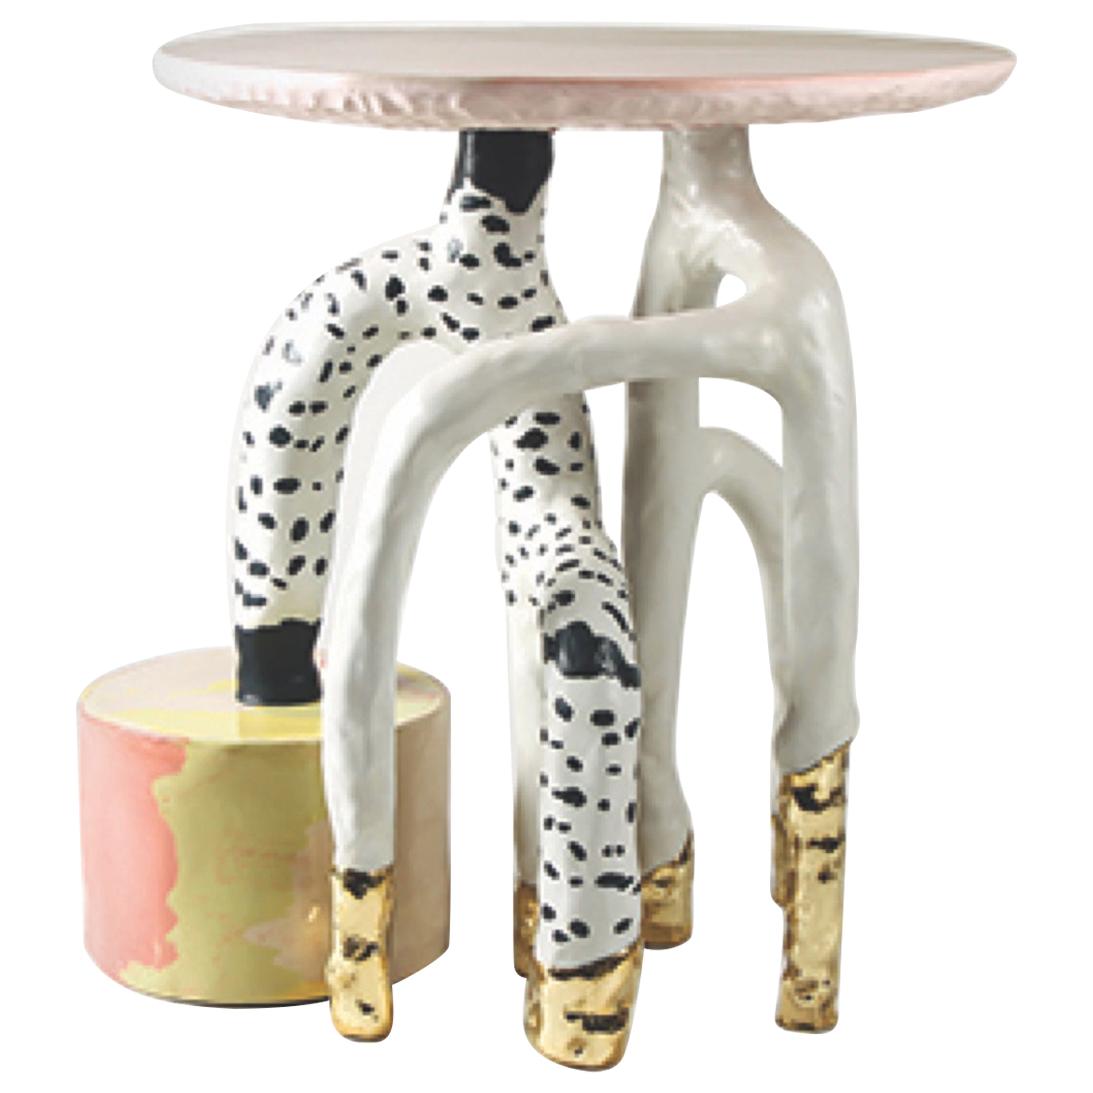 "Morph" Side Table by Sayar & Garibeh in Collaboration with Katie Stout